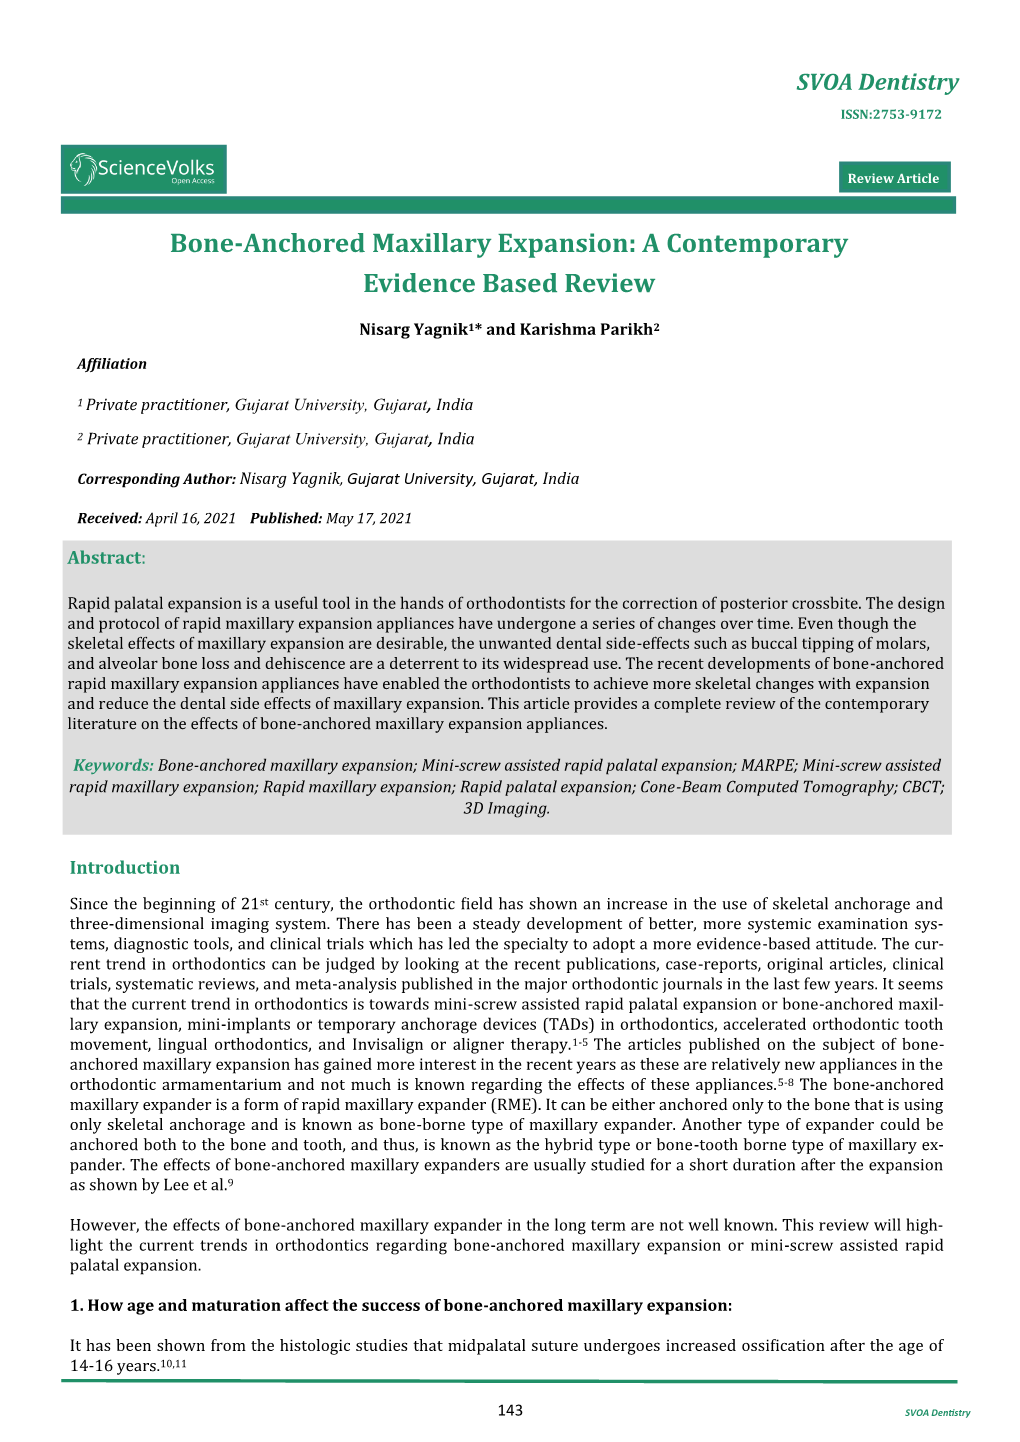 Bone-Anchored Maxillary Expansion: a Contemporary Evidence Based Review